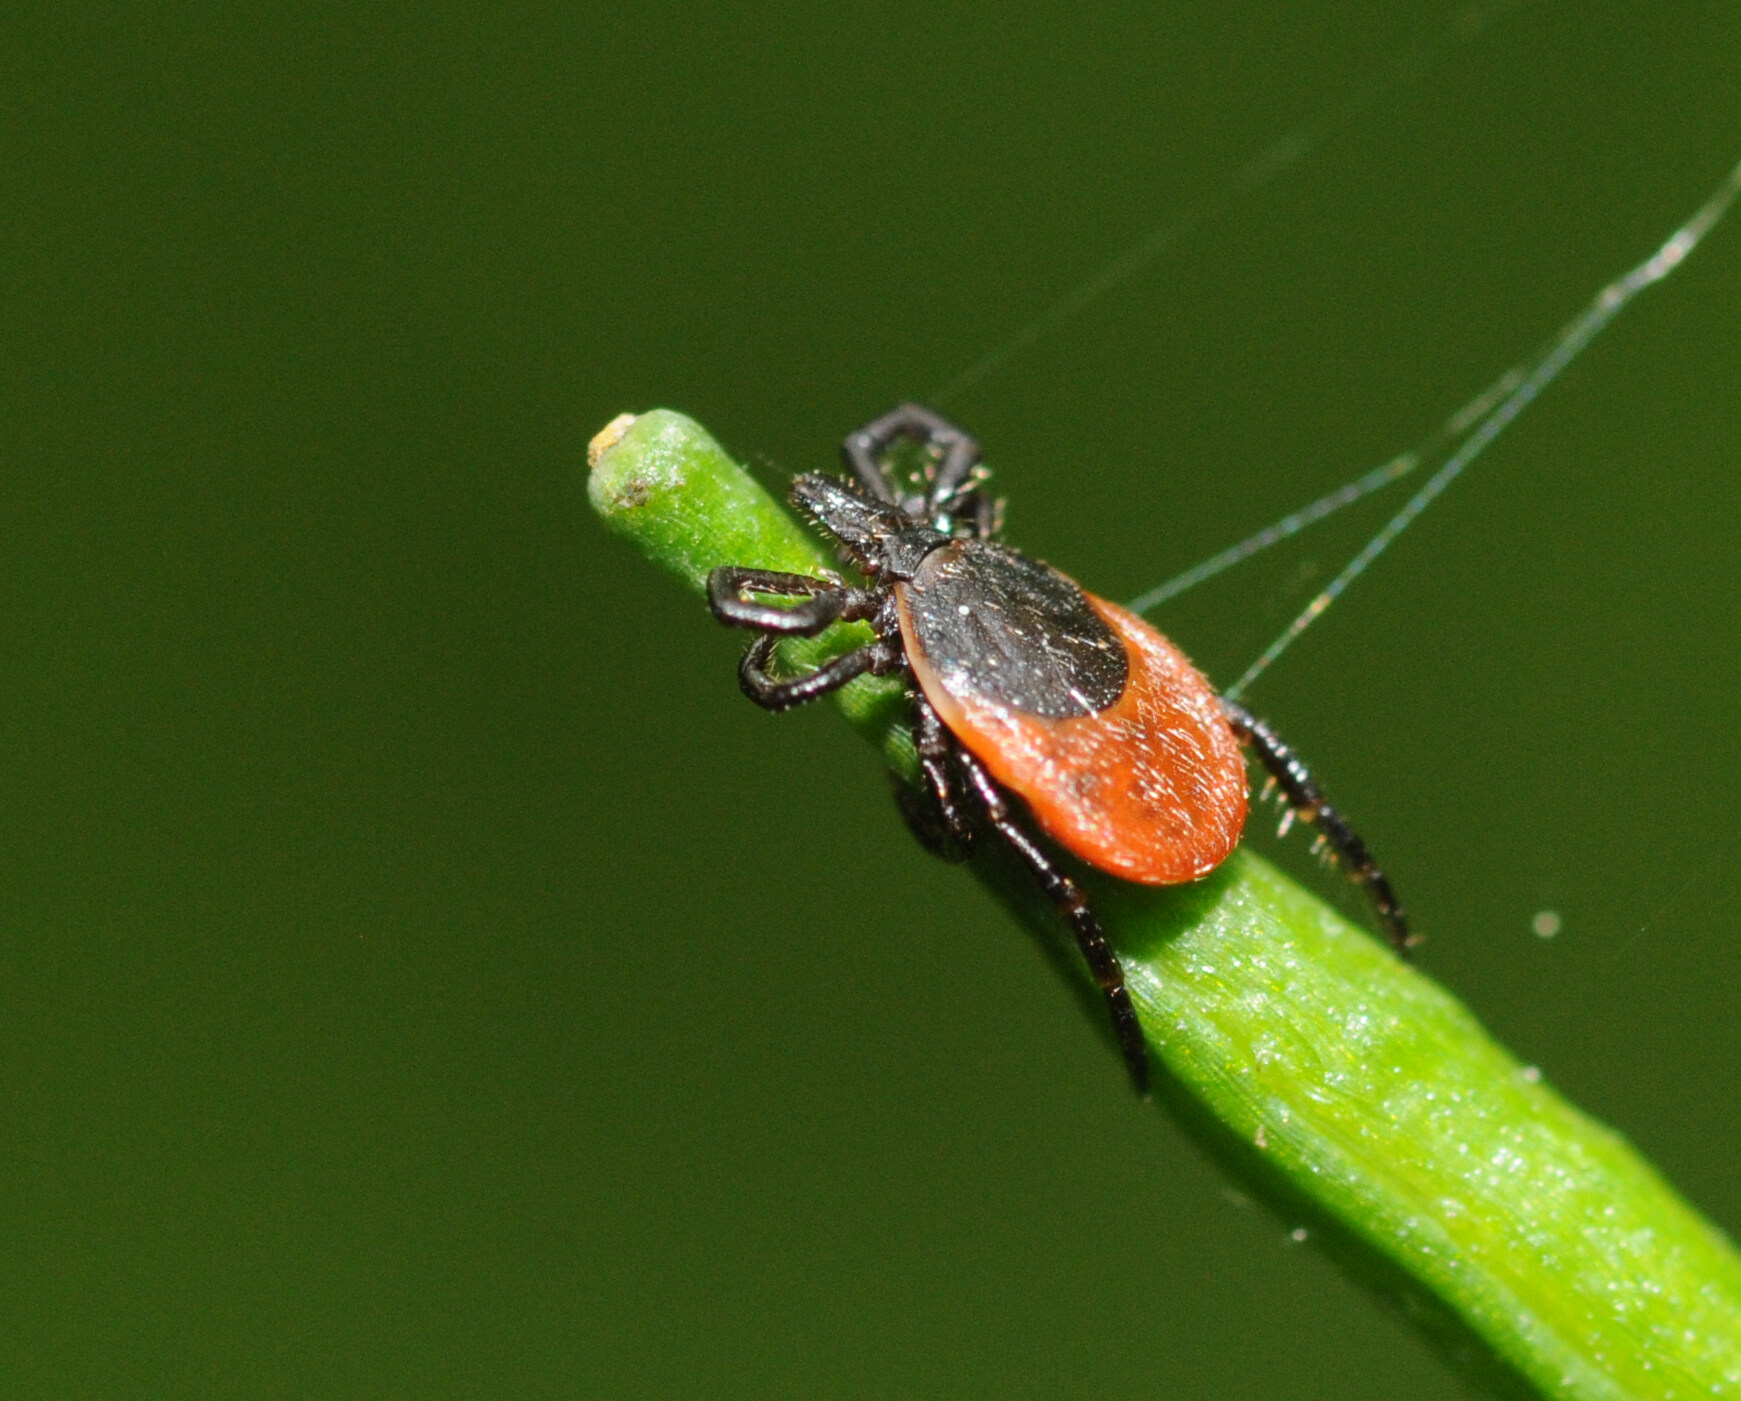 Photograph of a tick sitting on the end of a leaf or branch, presumably waiting for an animal to walk by. The tick has eight legs and an orange and black back.